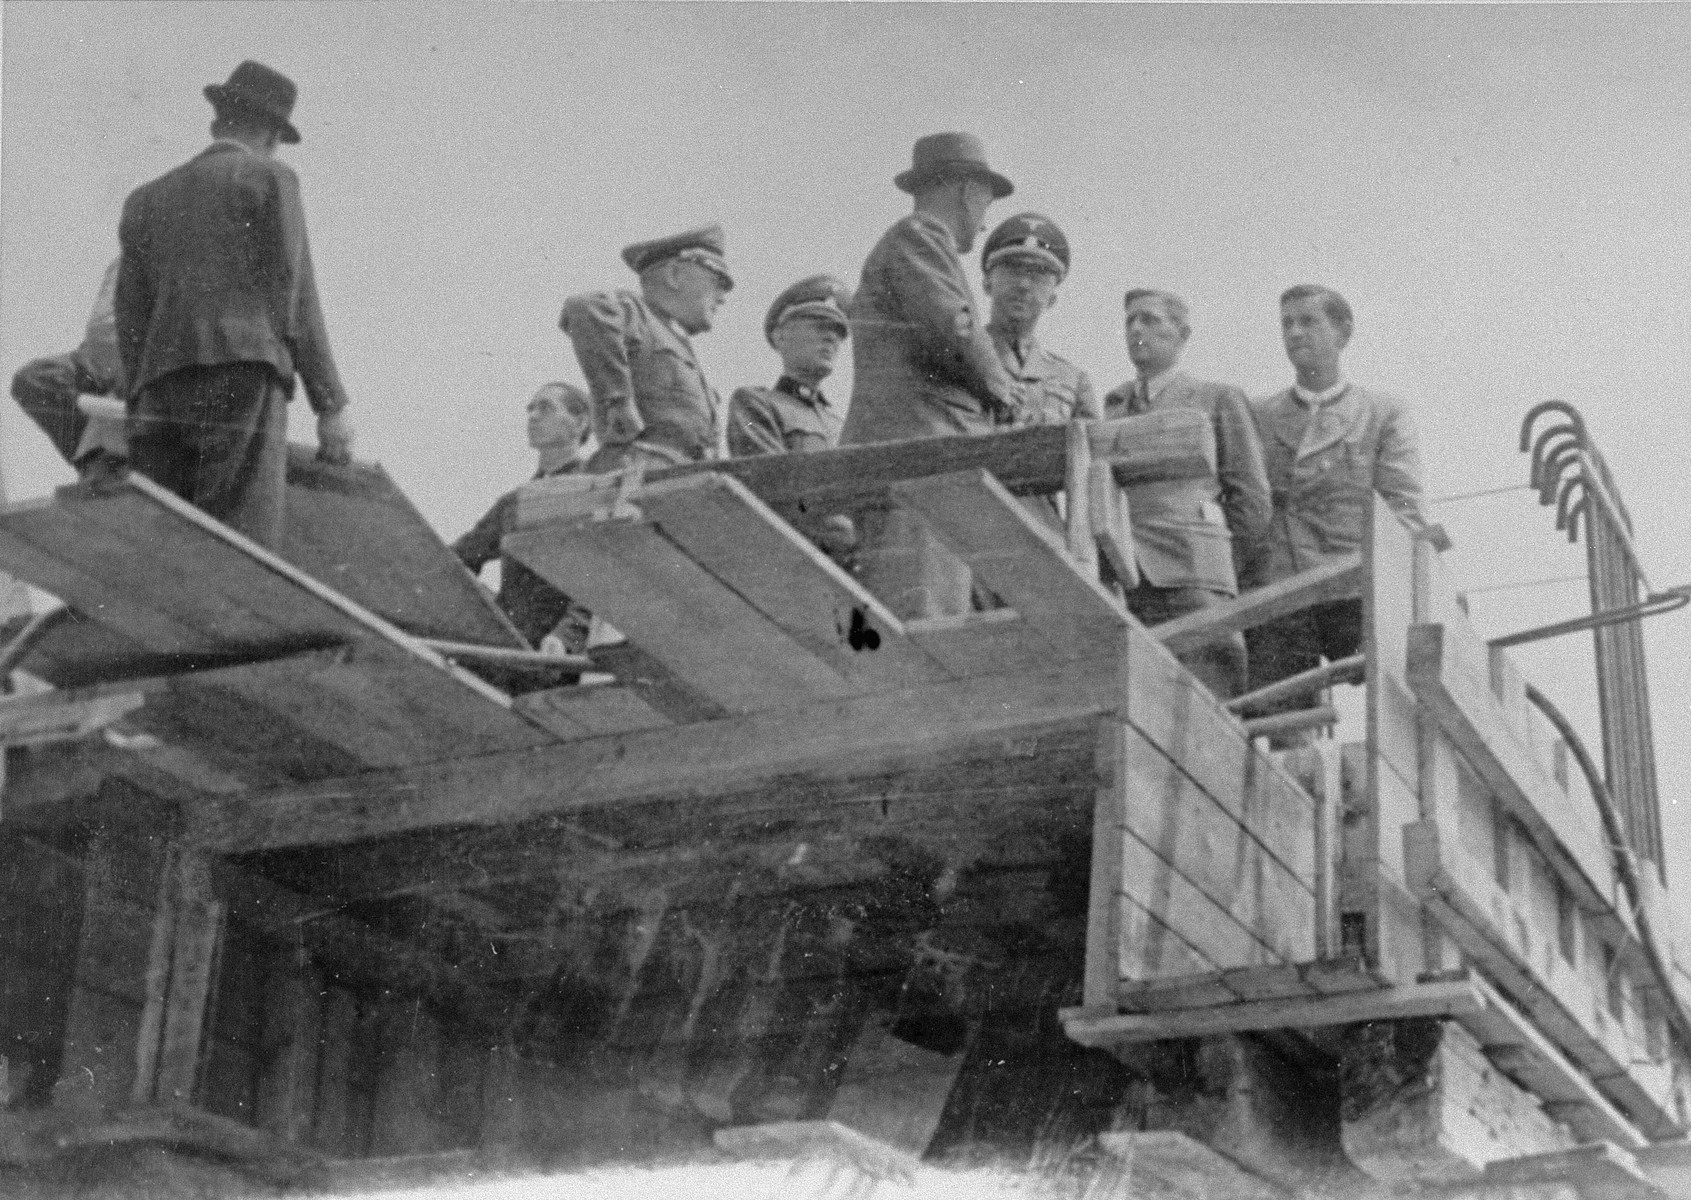 Reichsfuehrer SS Heinrich Himmler converses with Max Faust (wearing the fedora) on the upper floor of a partially constructed building, during a tour of the Monowitz-Buna building site. 

Faust, who was an IG Farben engineer, was the head of building operations at Monowitz-Buna.